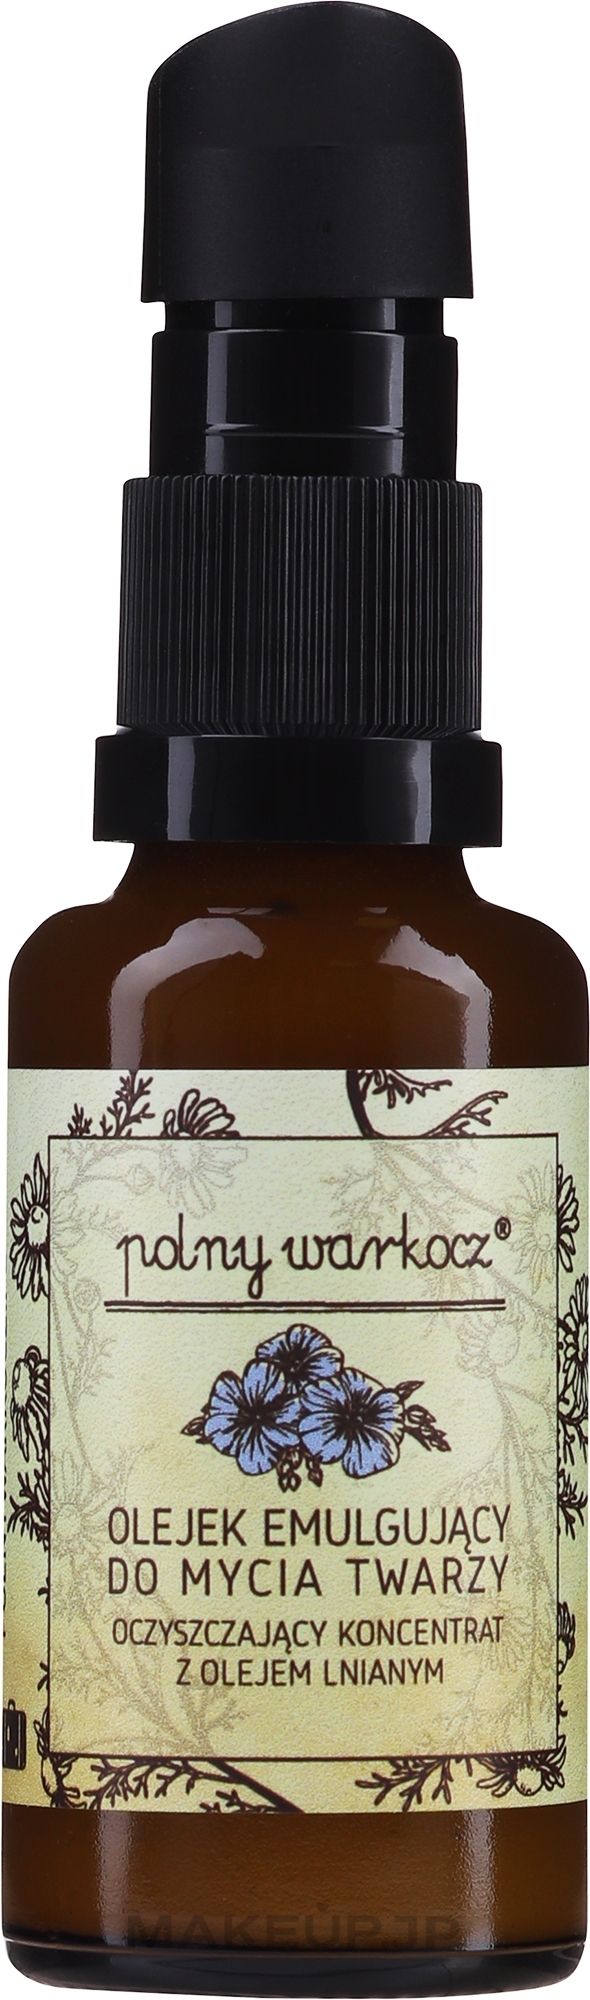 Cleansing Face Oil with Linseed - Polny Warkocz (mini size) — photo 30 ml